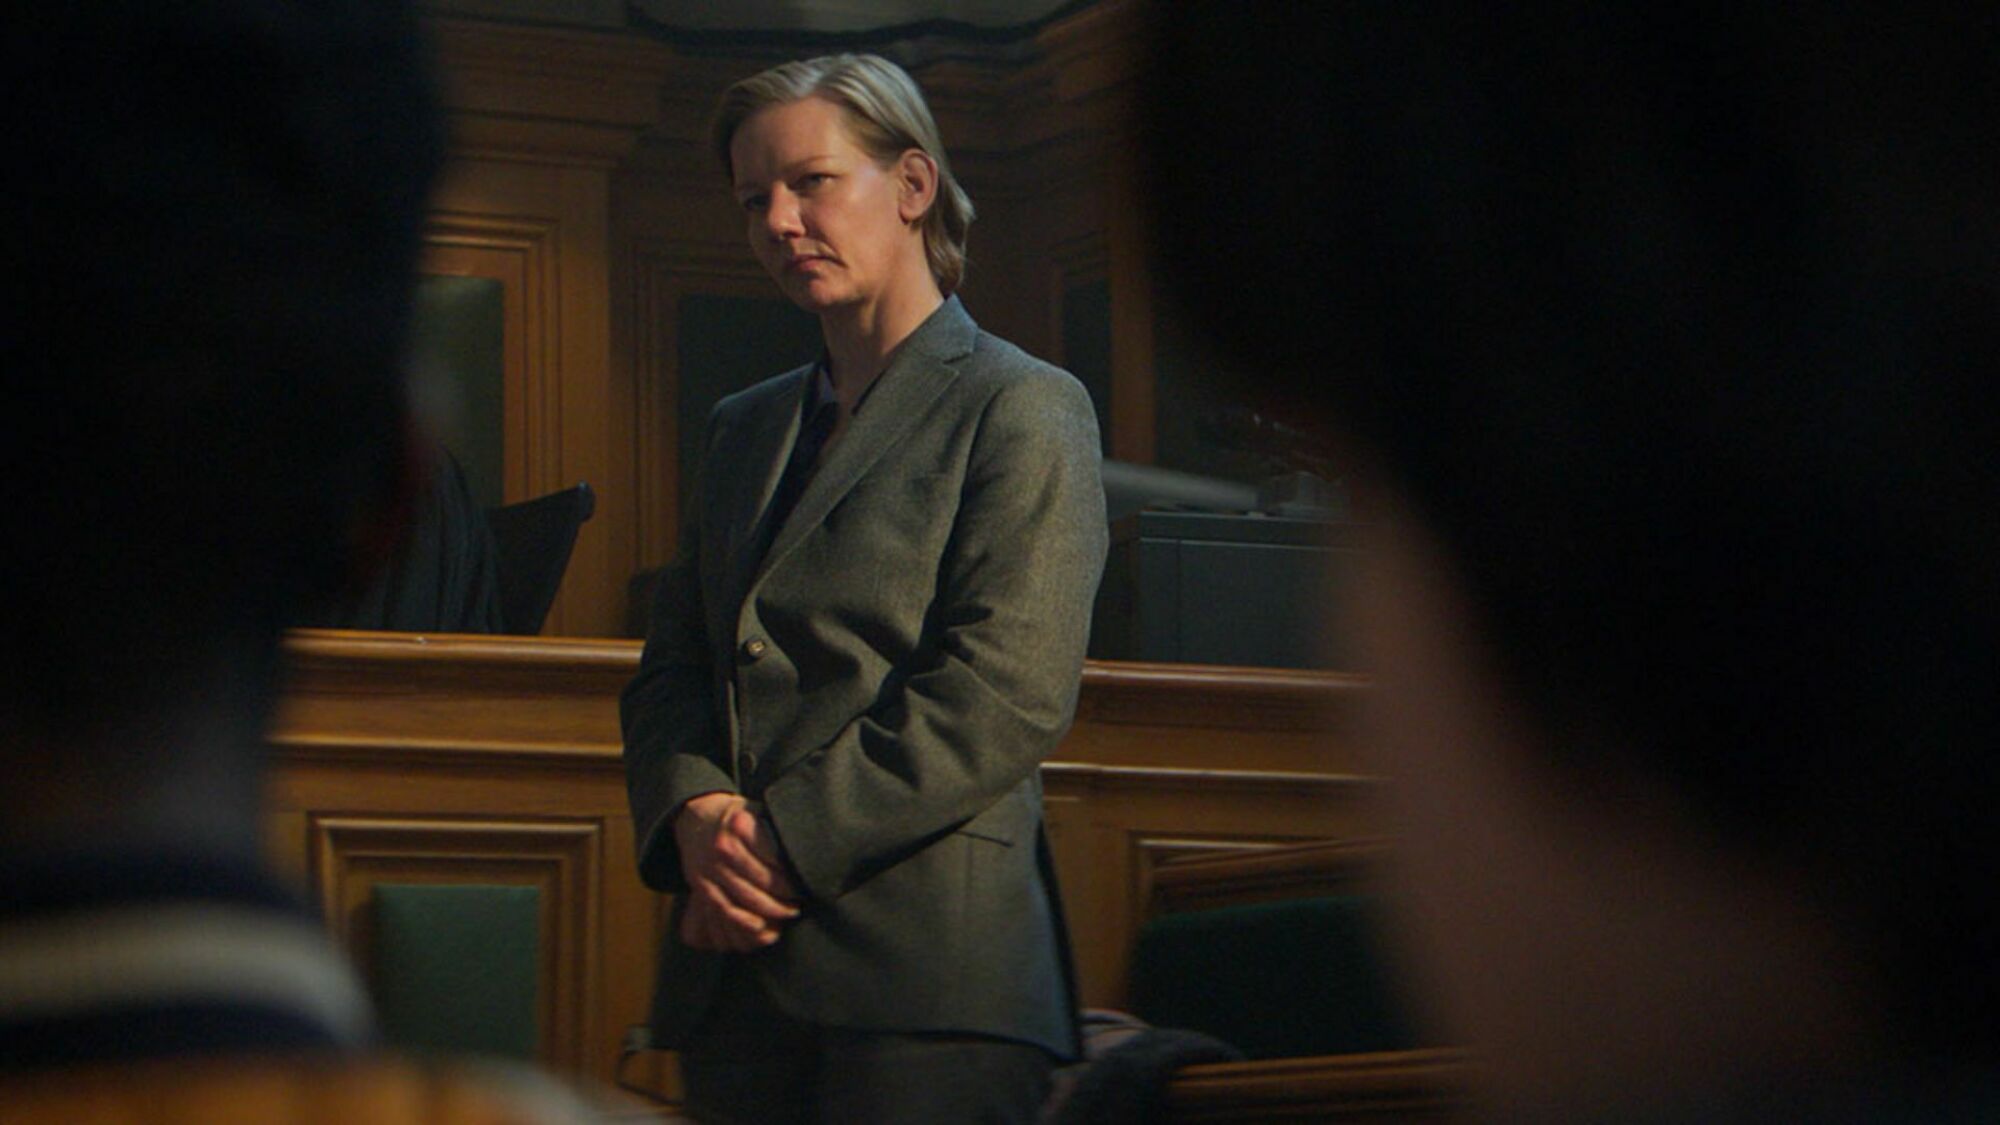 ‘Anatomy of a Fall’ review: An enrapturing courtroom drama about little details